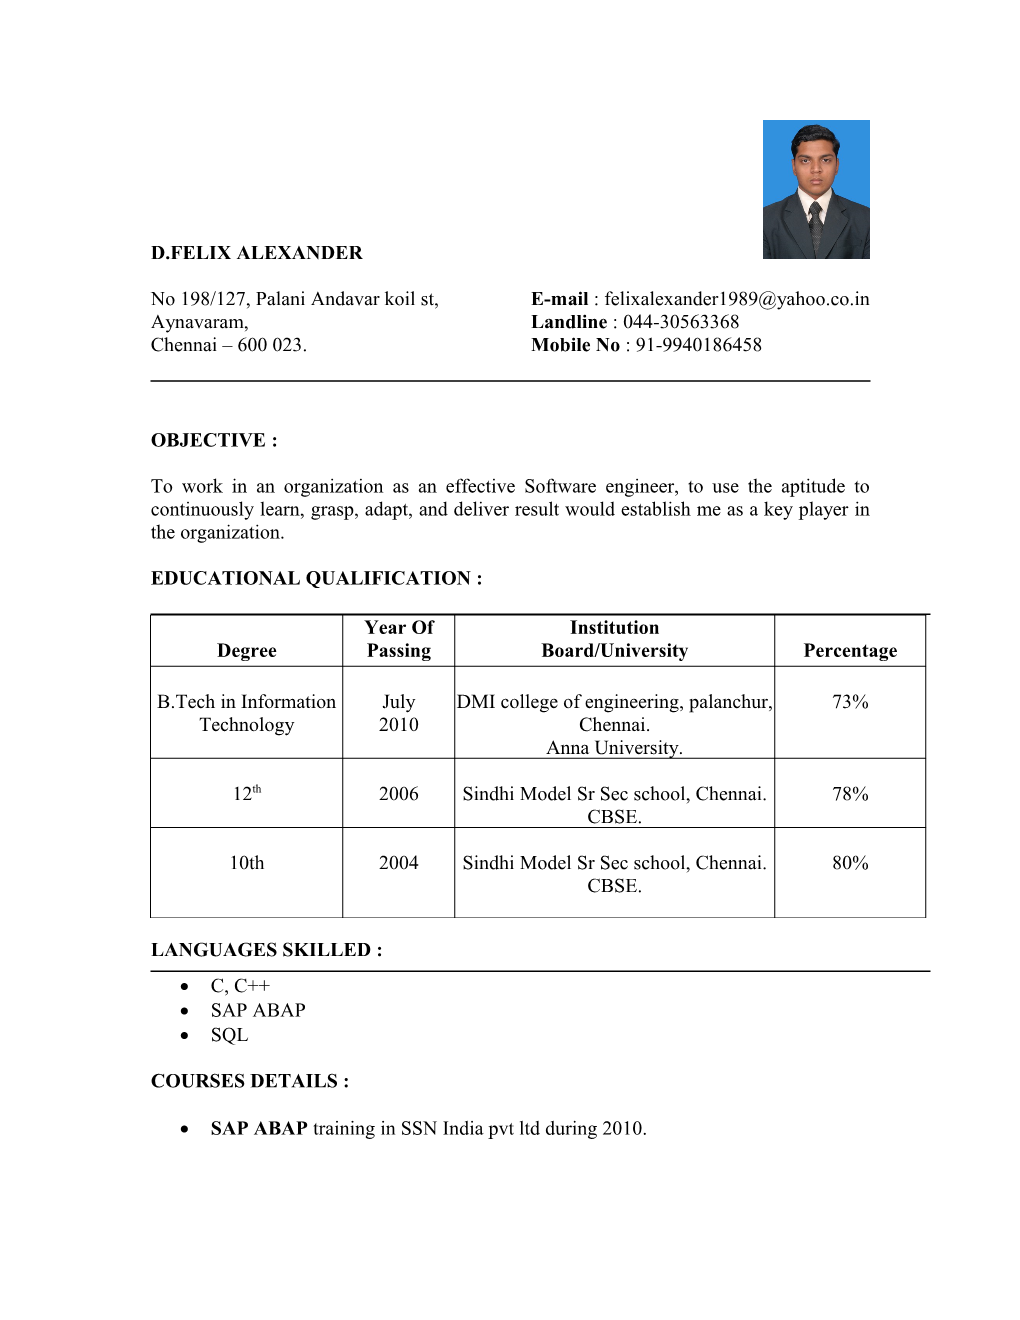 Template for Resume